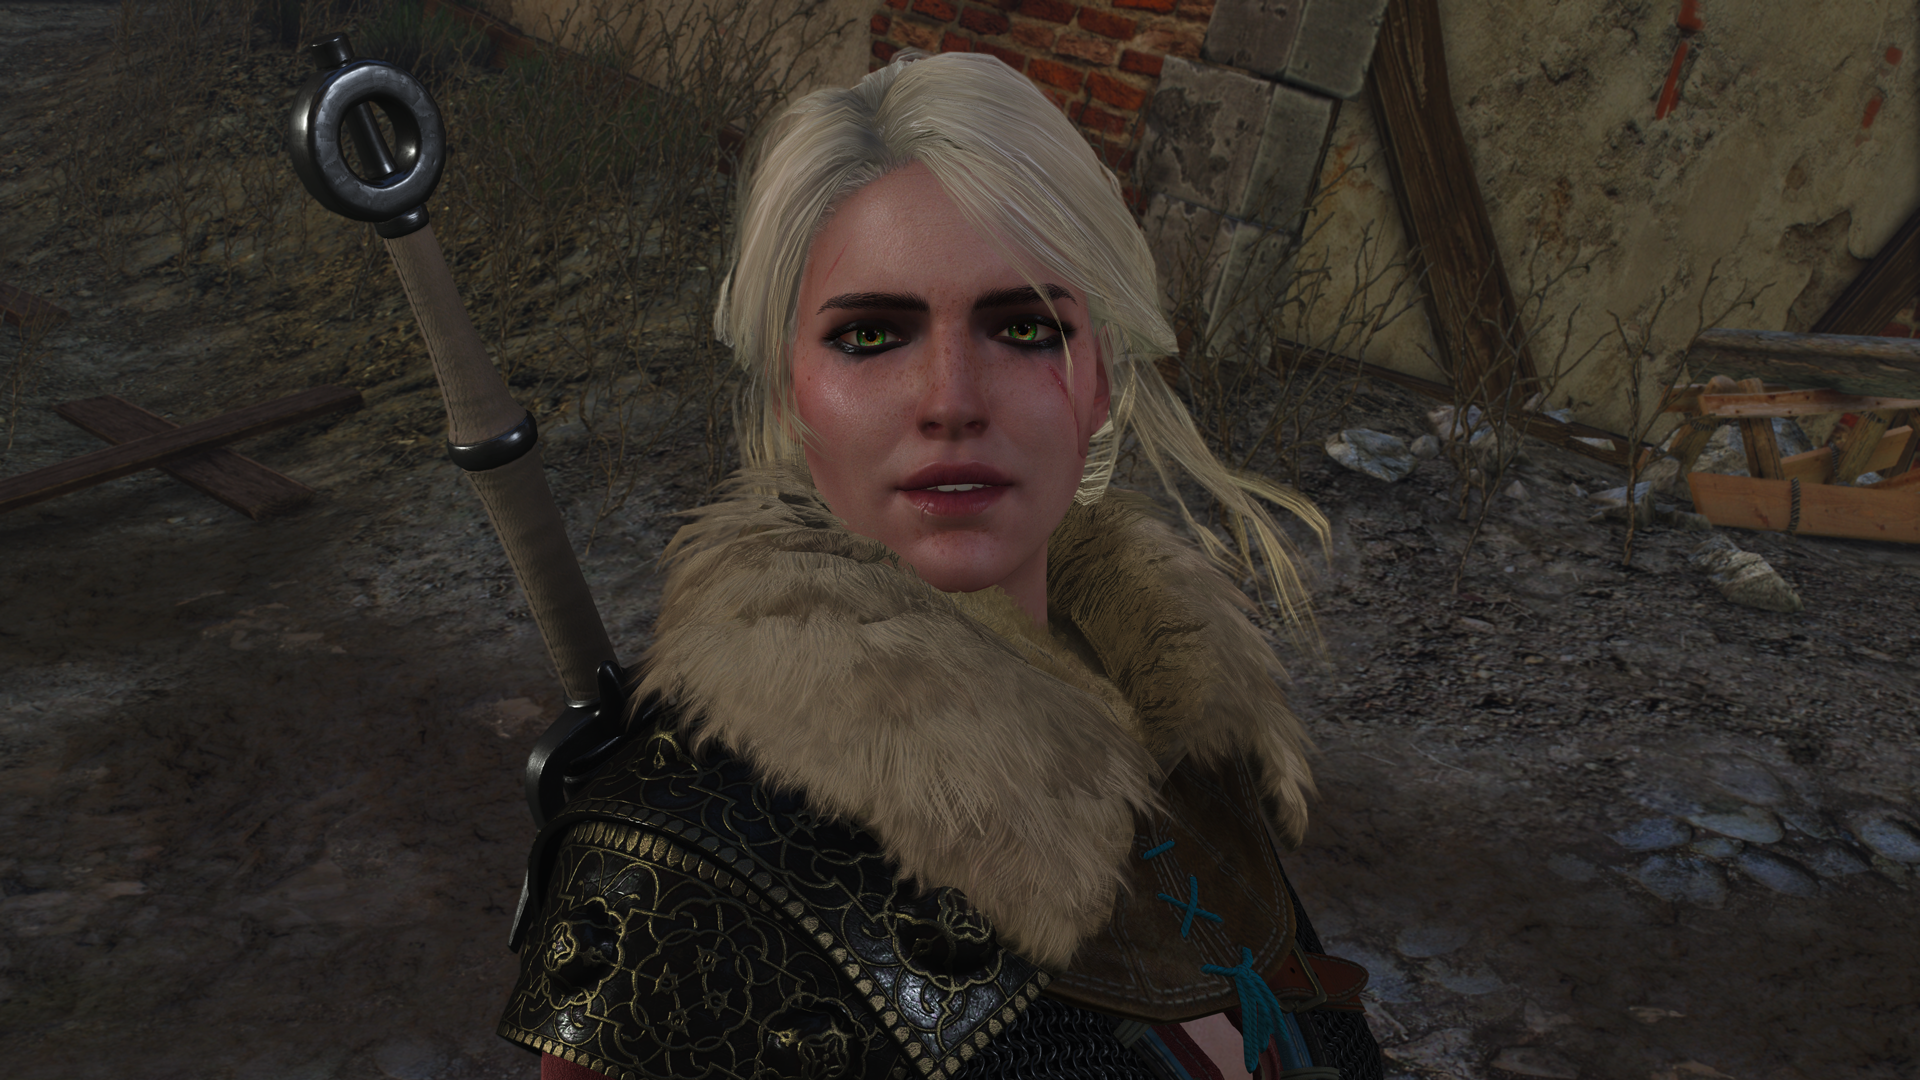 witcher3_2015_12_27_1wuqzj.png